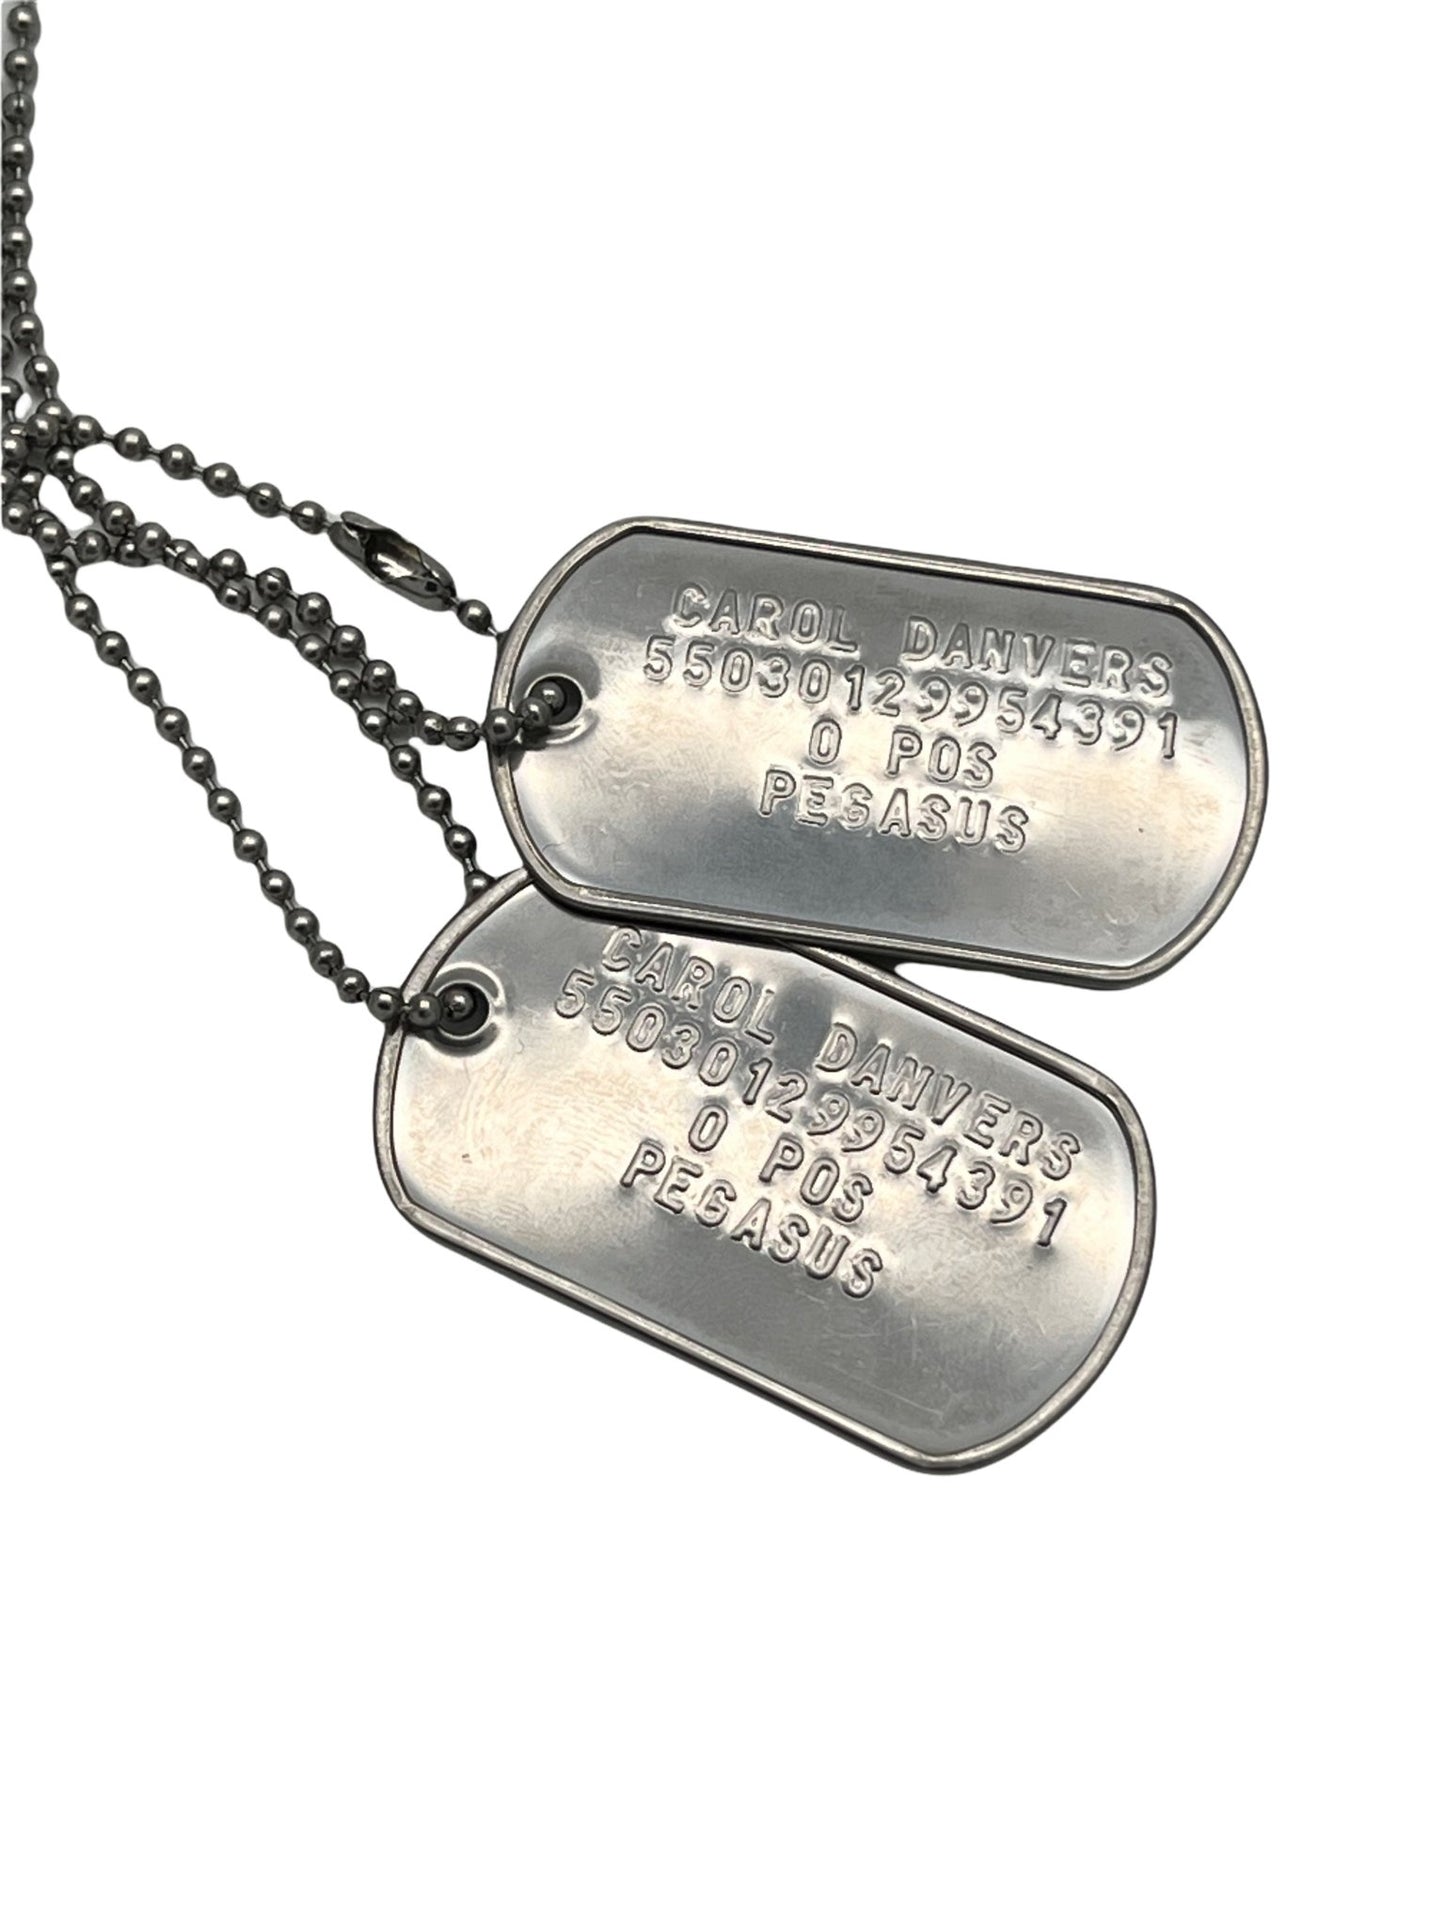 'CAPTAIN DANVERS' Military Dog Tags - Cosplay Costume Prop Replica - Stainless Steel Chains Included - TheDogTagCo